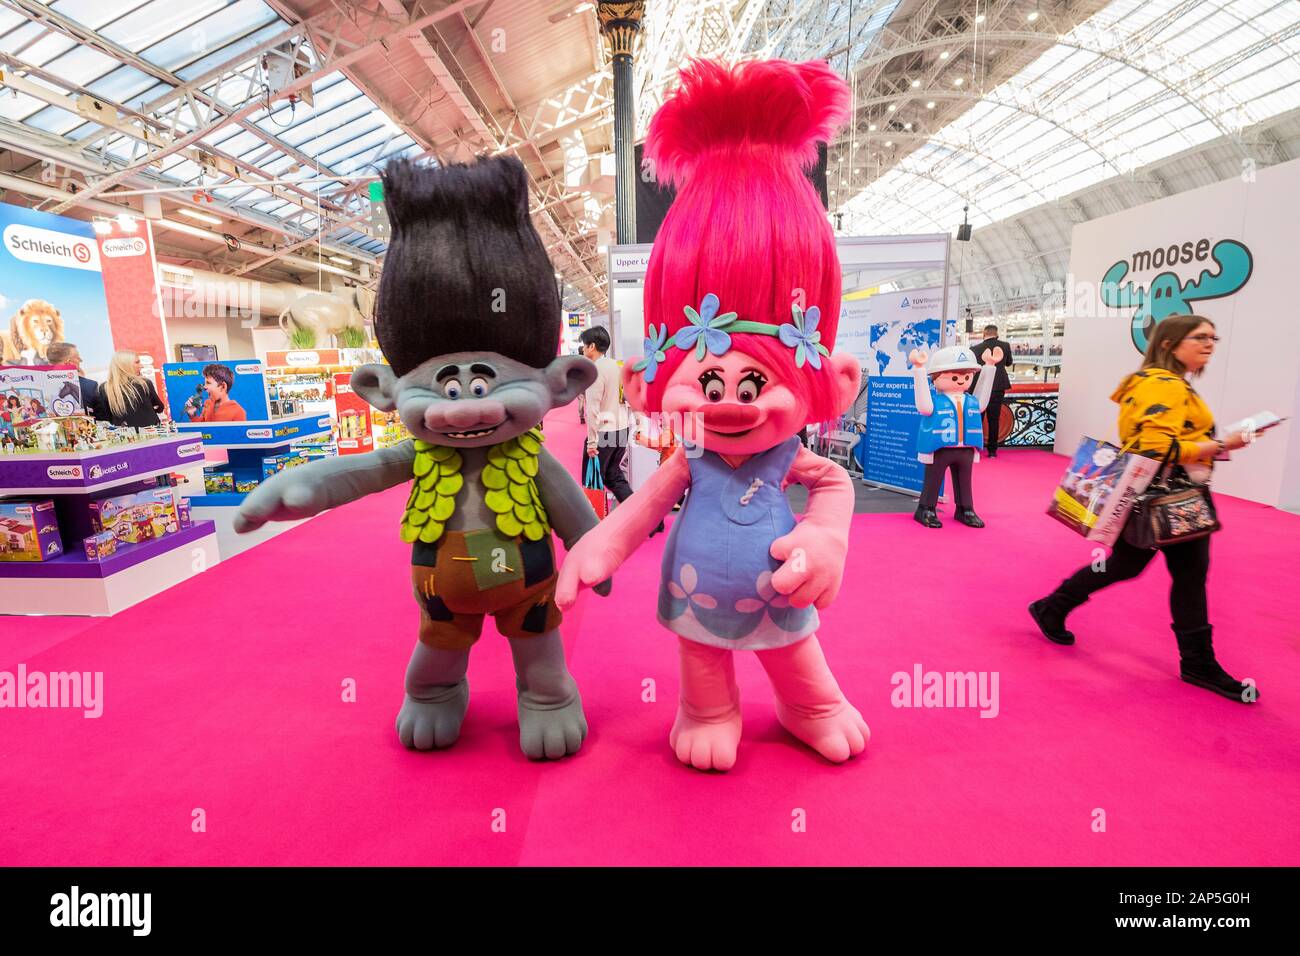 London, UK. 21st Jan 2020. Poppy and Branch from a new series, The Trolls -  The Toy fair opens at London's Olympia exhibition centre, organised by the  British Toy & Hobby Association.